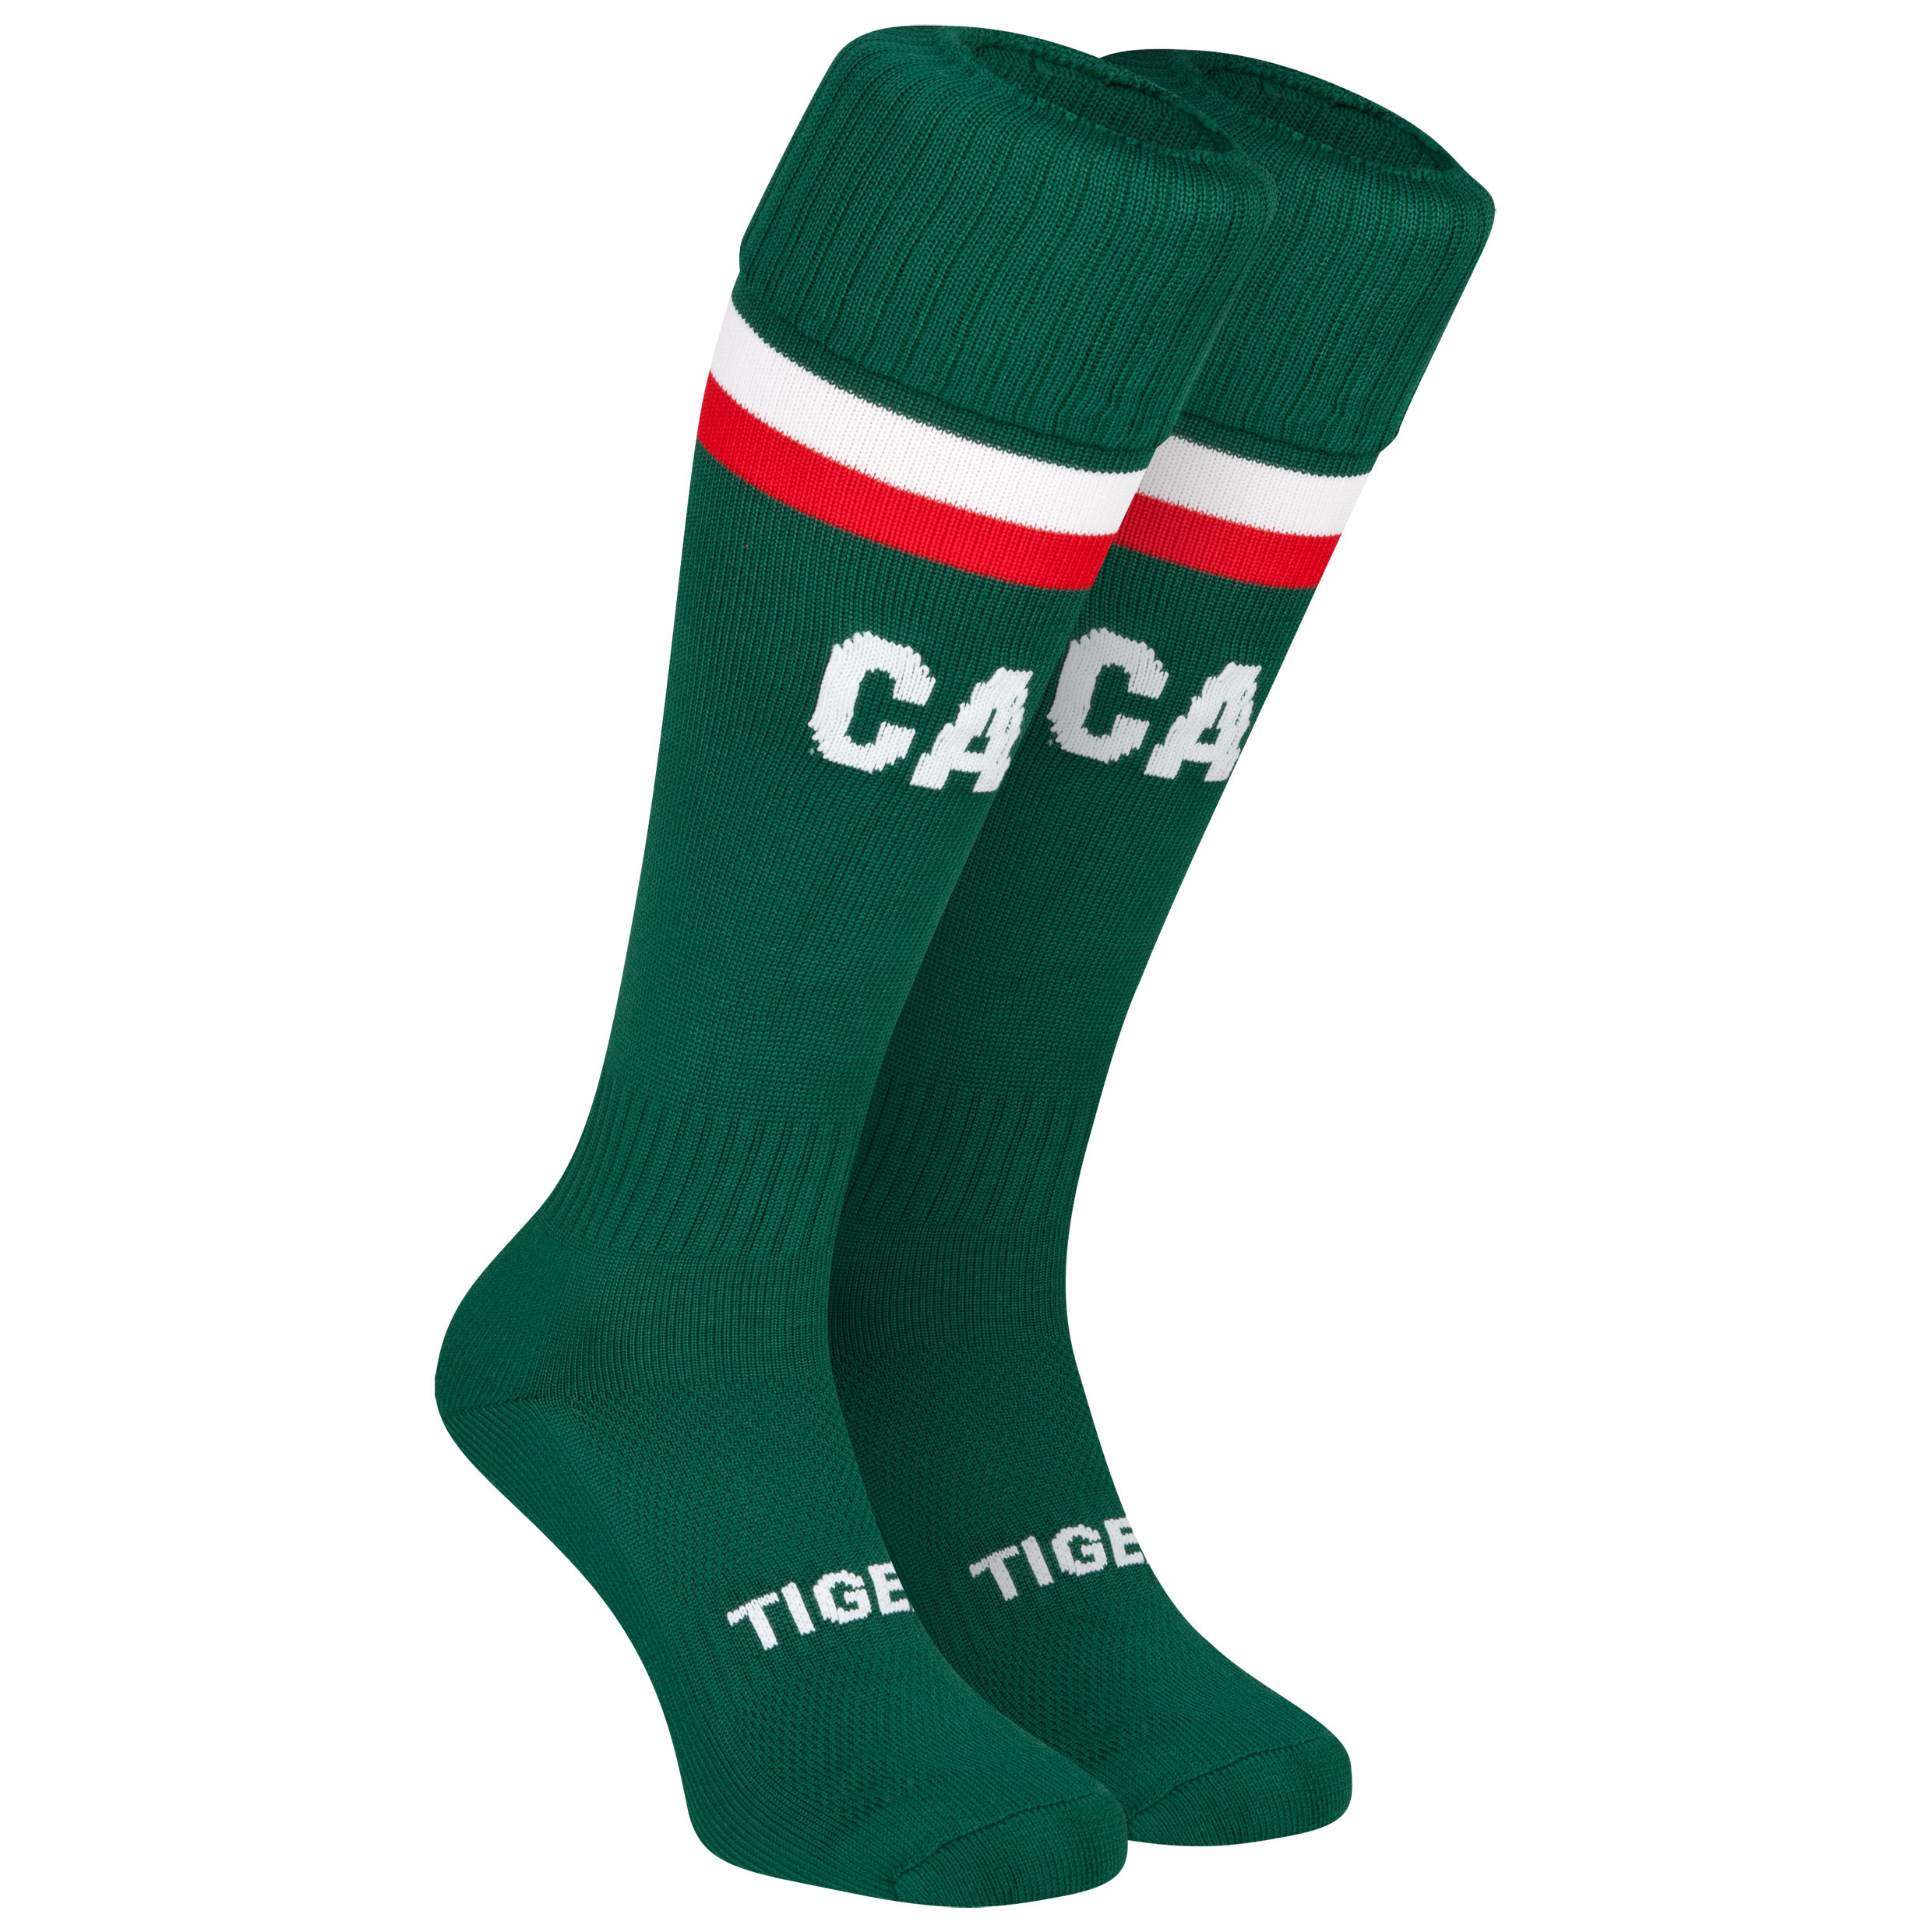 Leicester Tigers Home Sock 2013/14